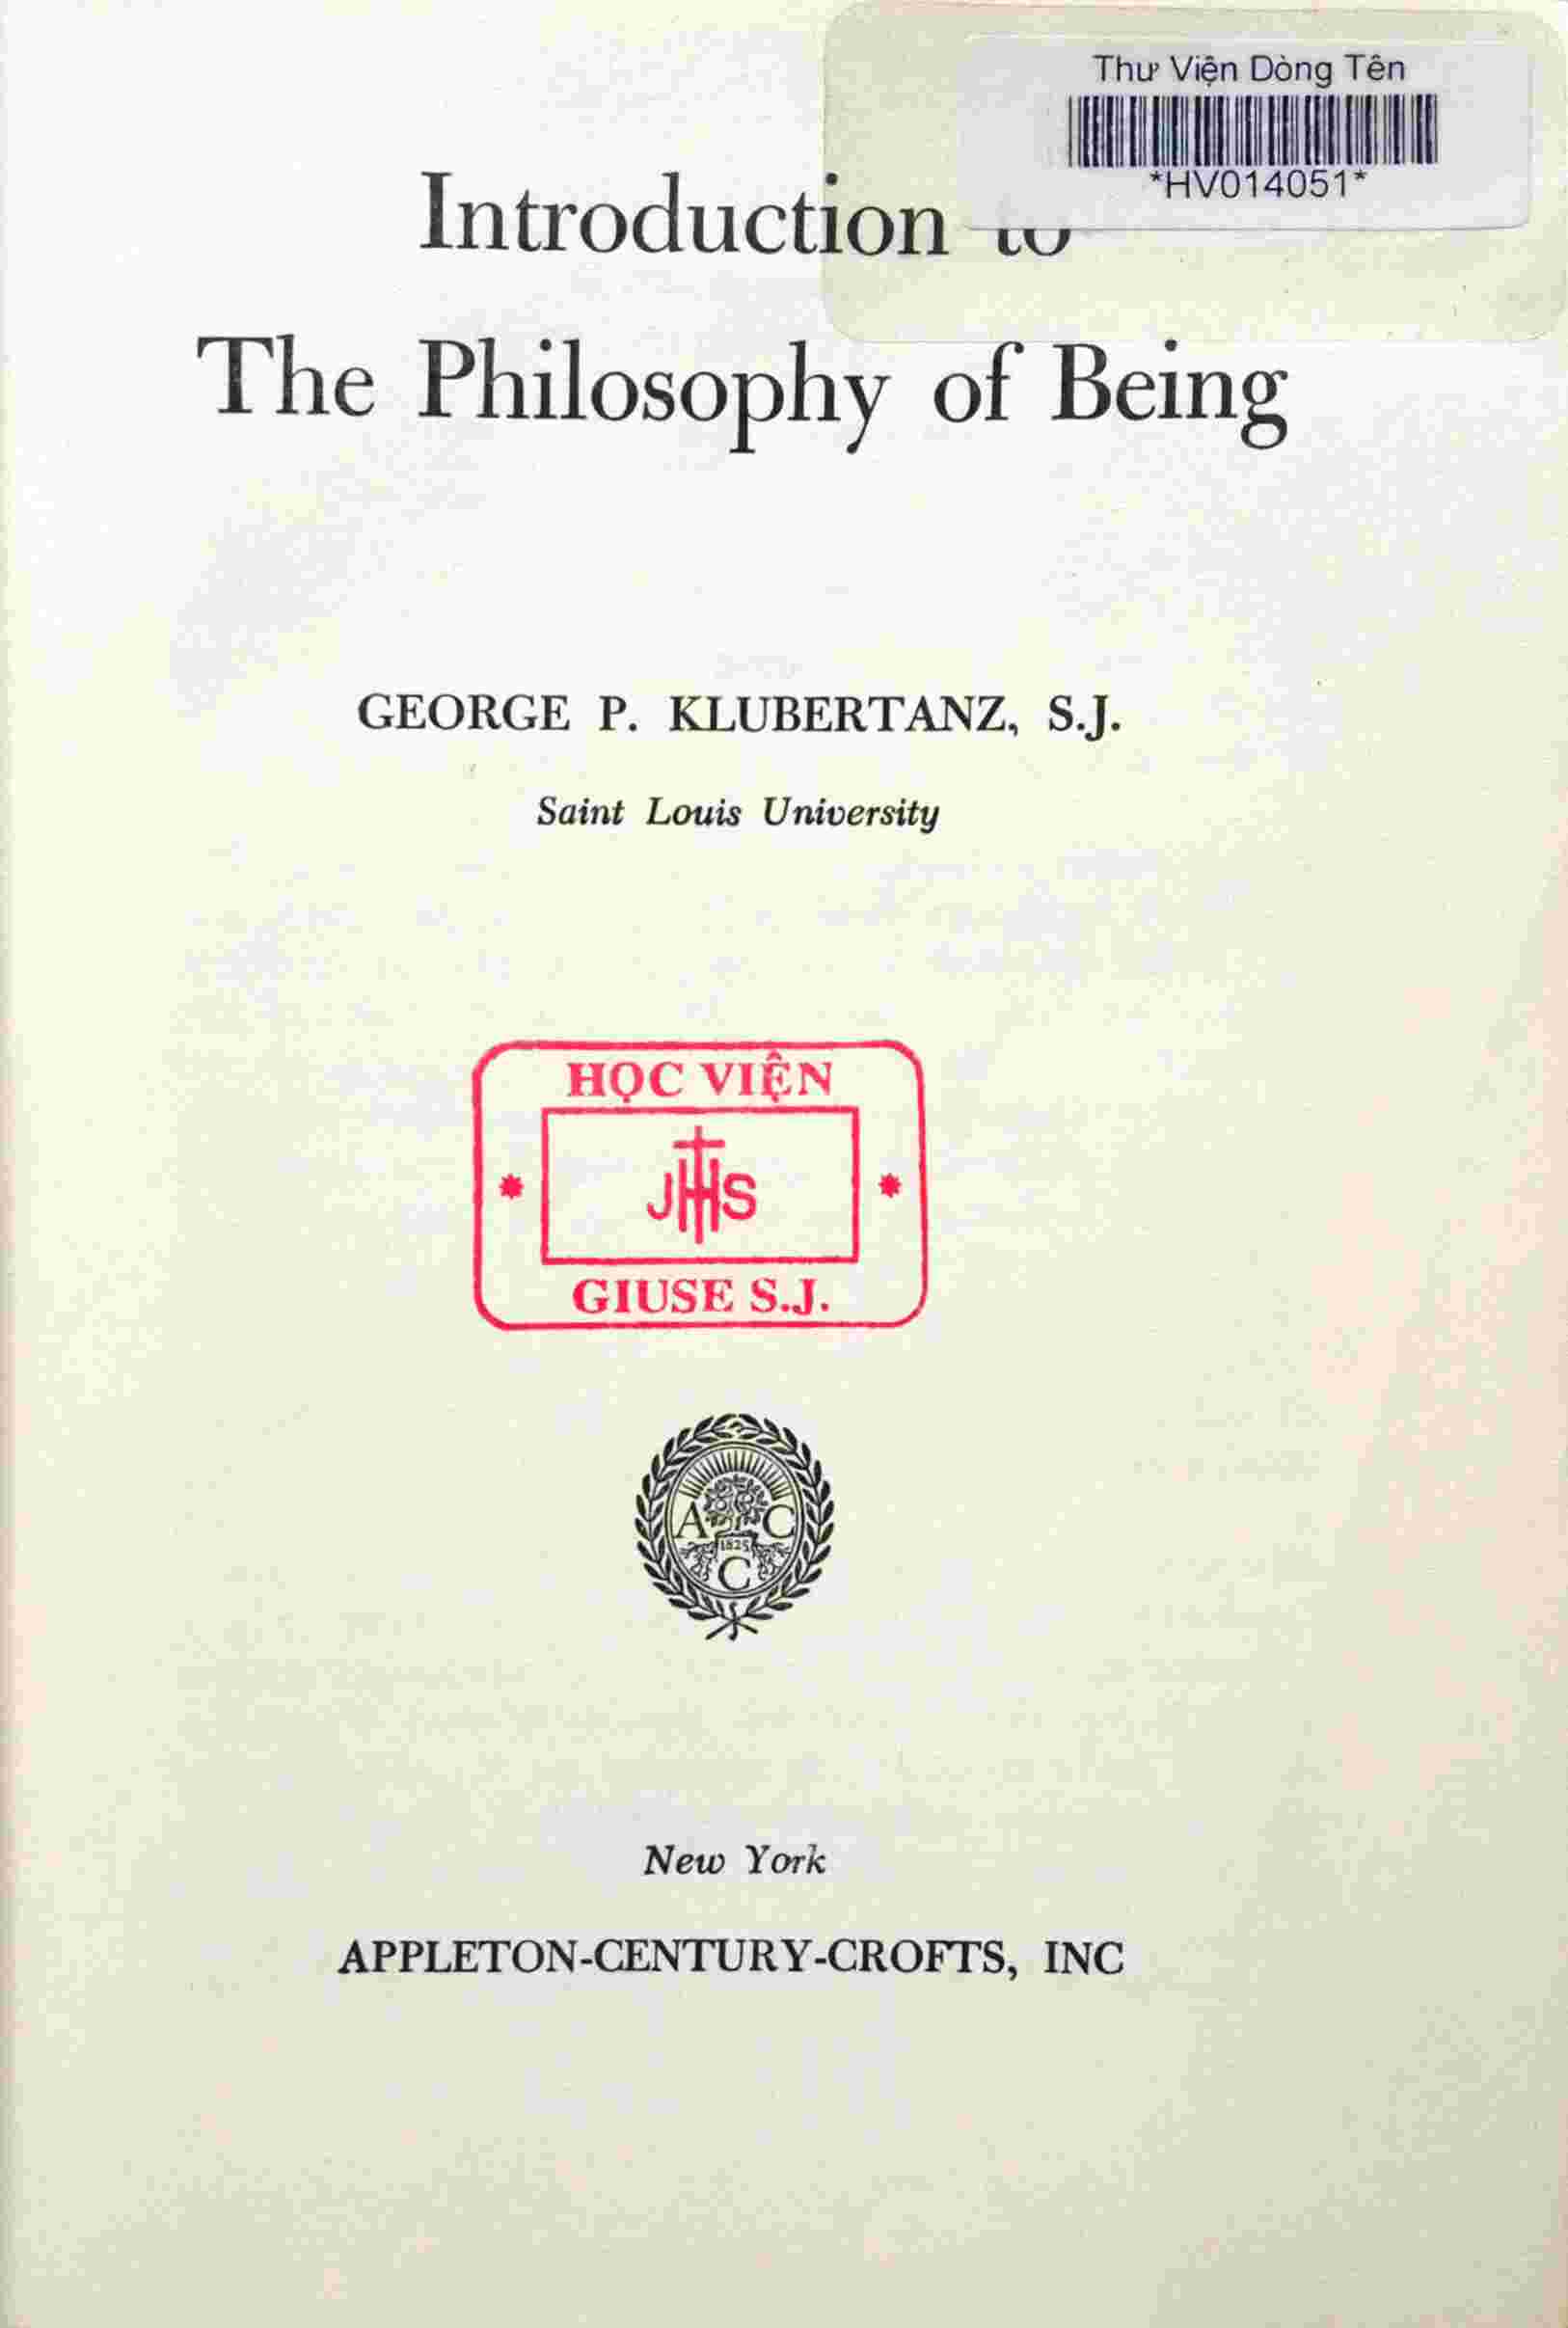 INTRODUCTION TO THE PHILOSOPHY OF BEING